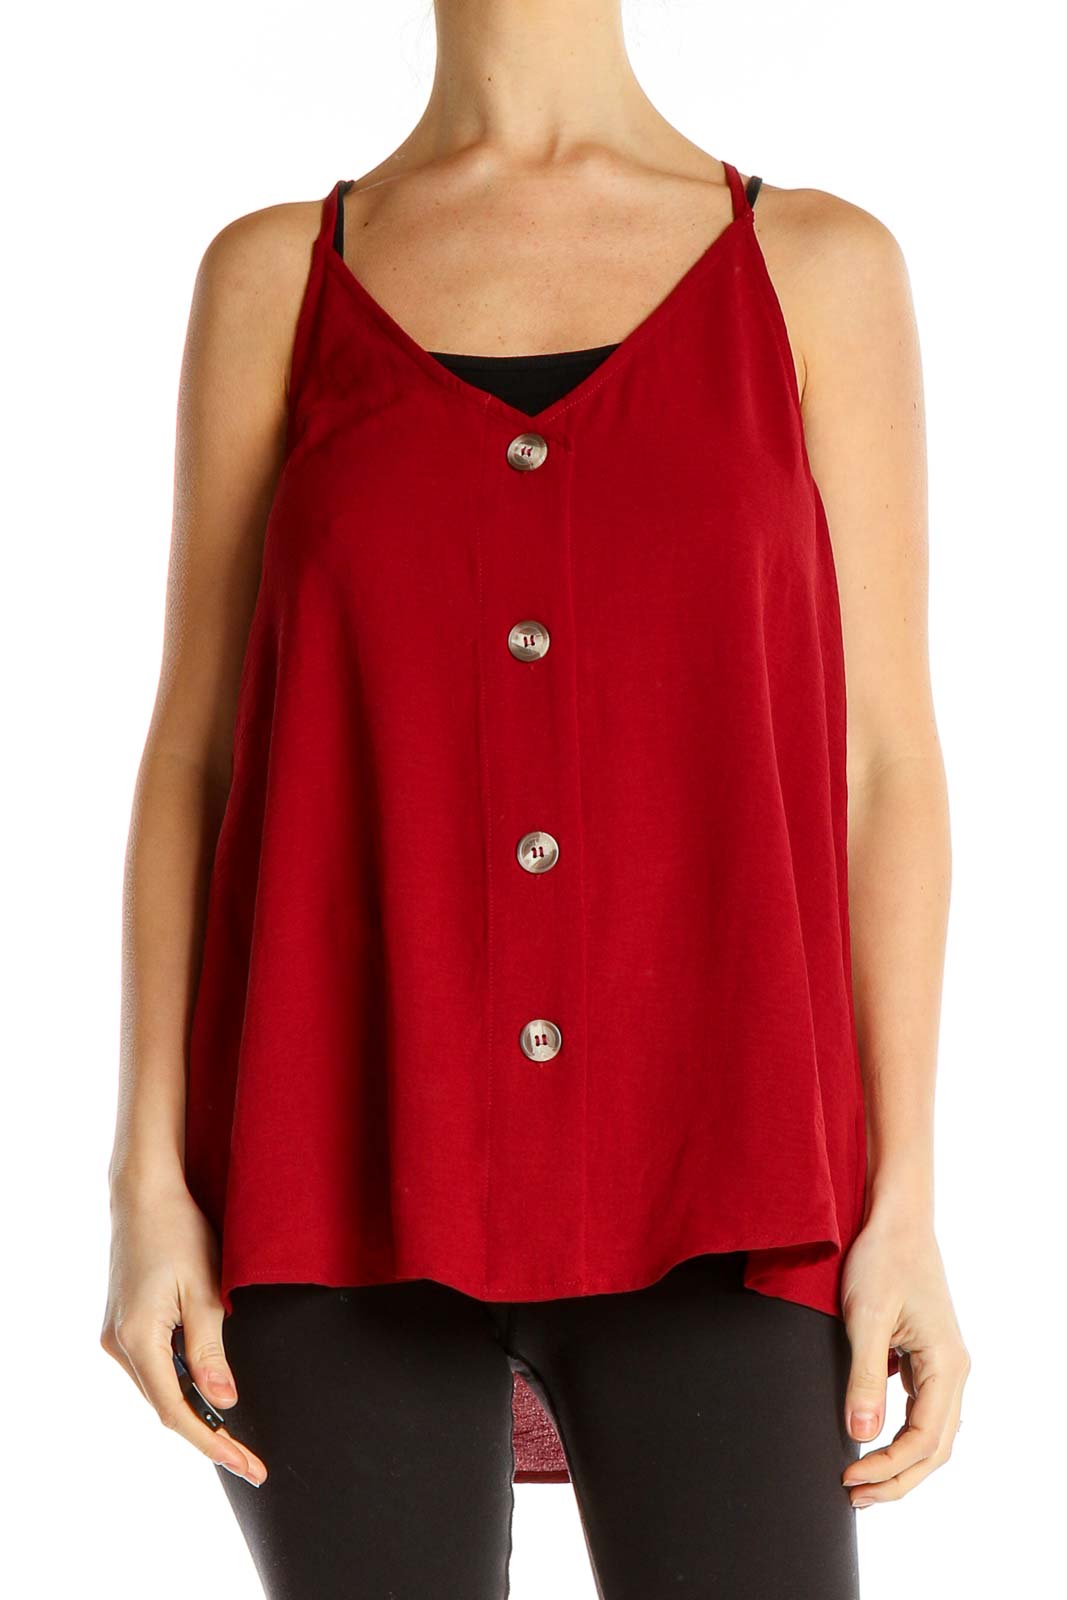 Red Tank Top Front